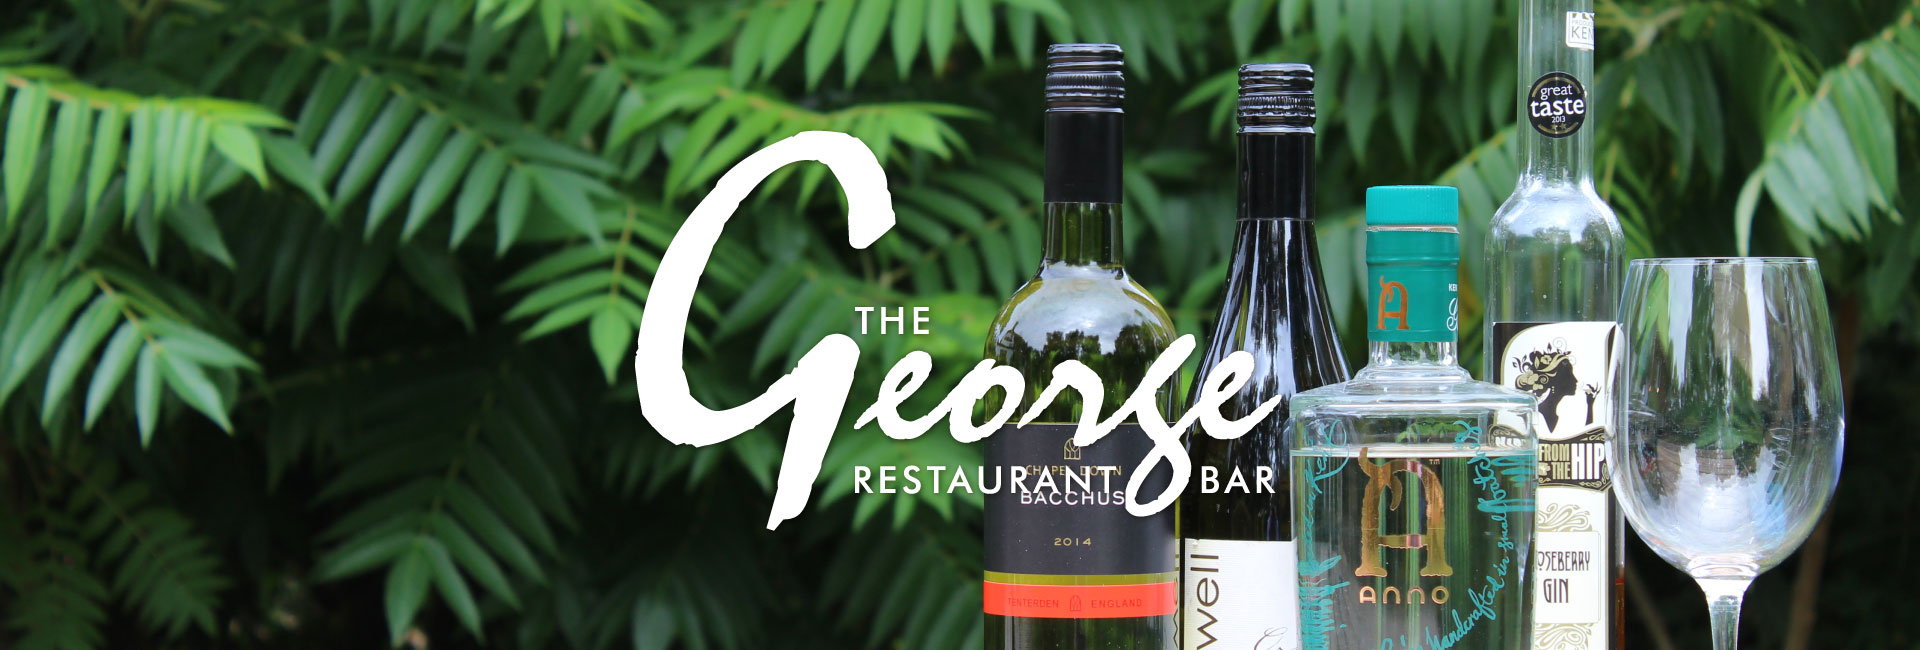 News from The George Restaurant & Bar Molash